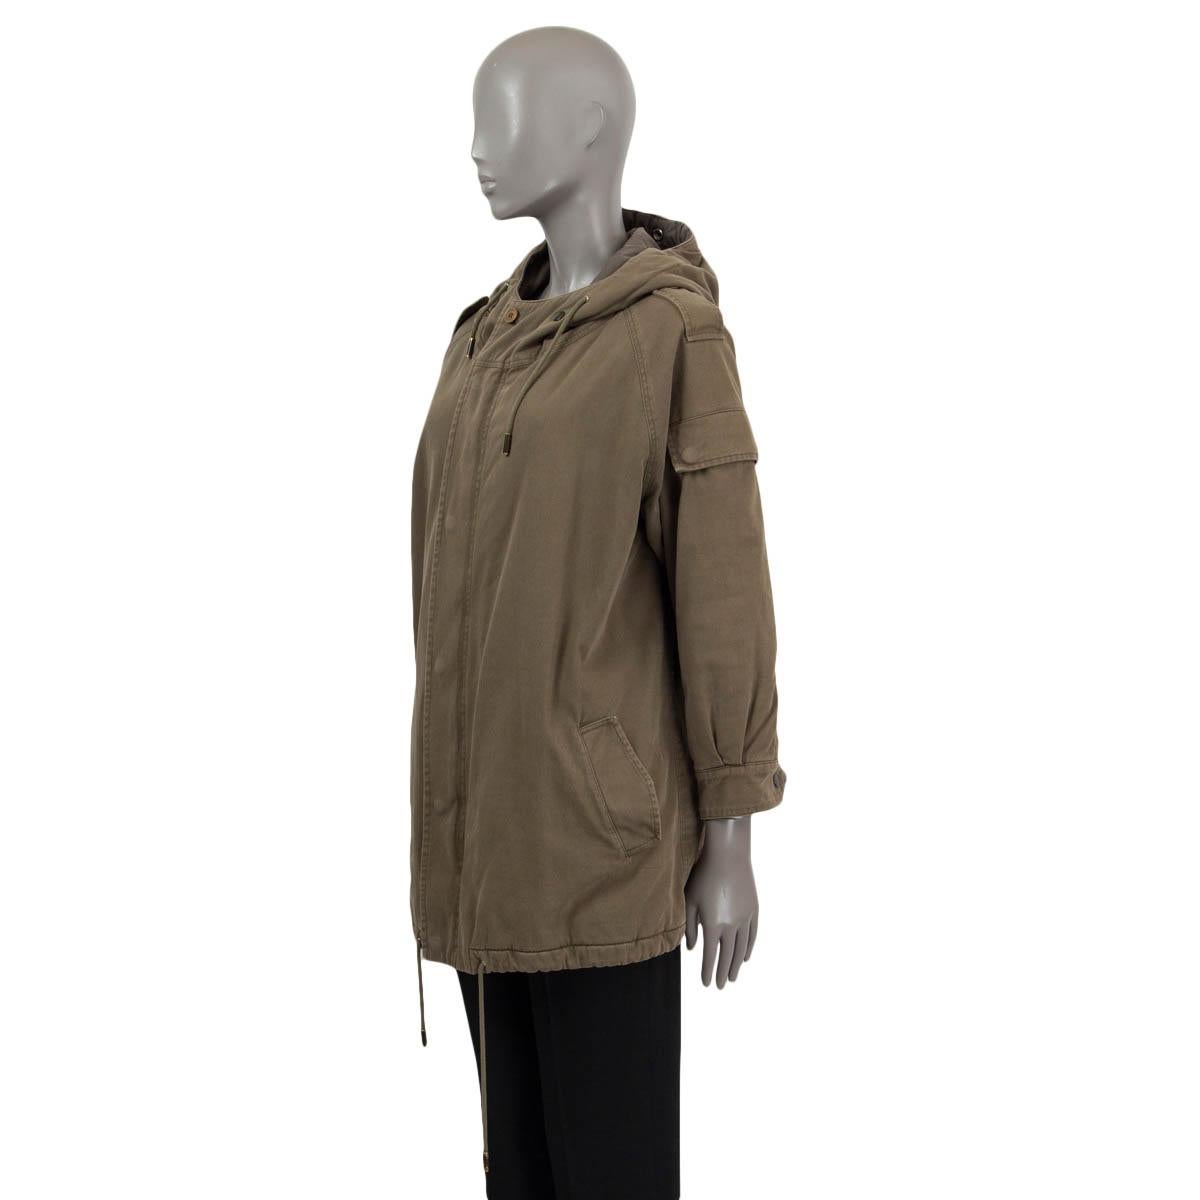 SAINT LAURENT olive green cotton 2015 OVERSIZED PArkA Coat Jacket 36 XS In Excellent Condition For Sale In Zürich, CH